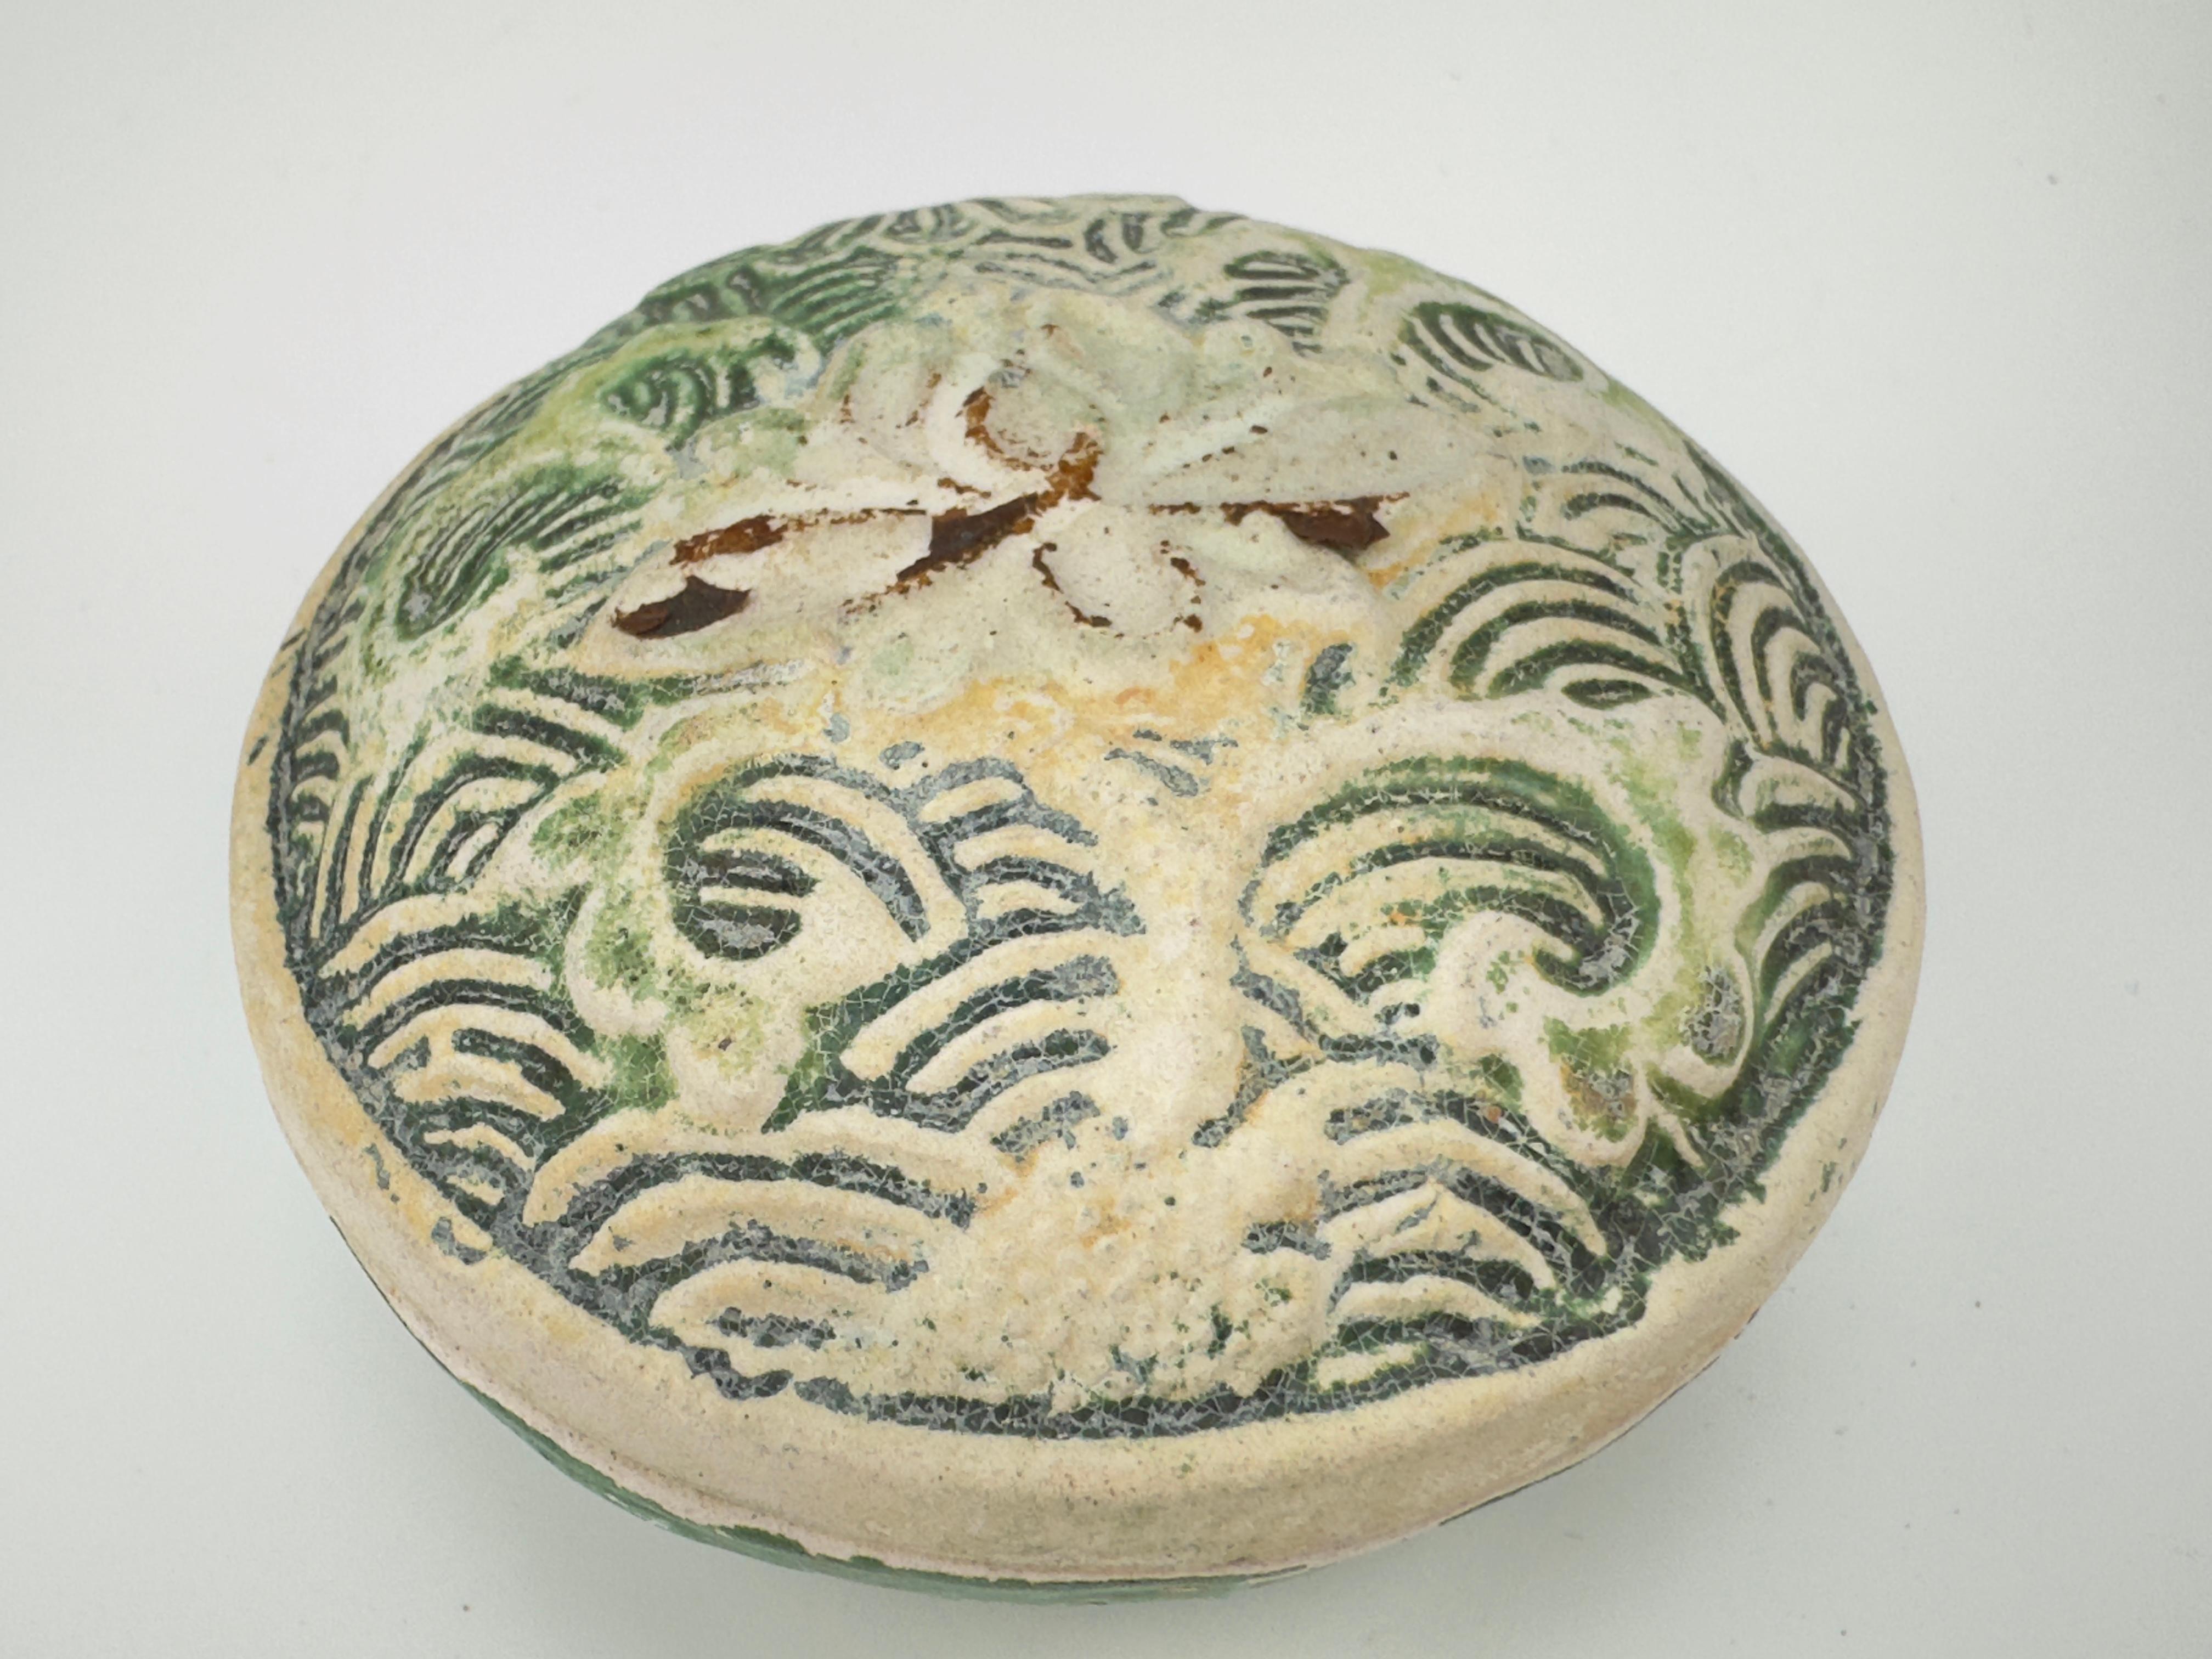 Swatow Lidded Boxes in the shape of Waves and Flowers, Late Ming Era(16-17th c) For Sale 3